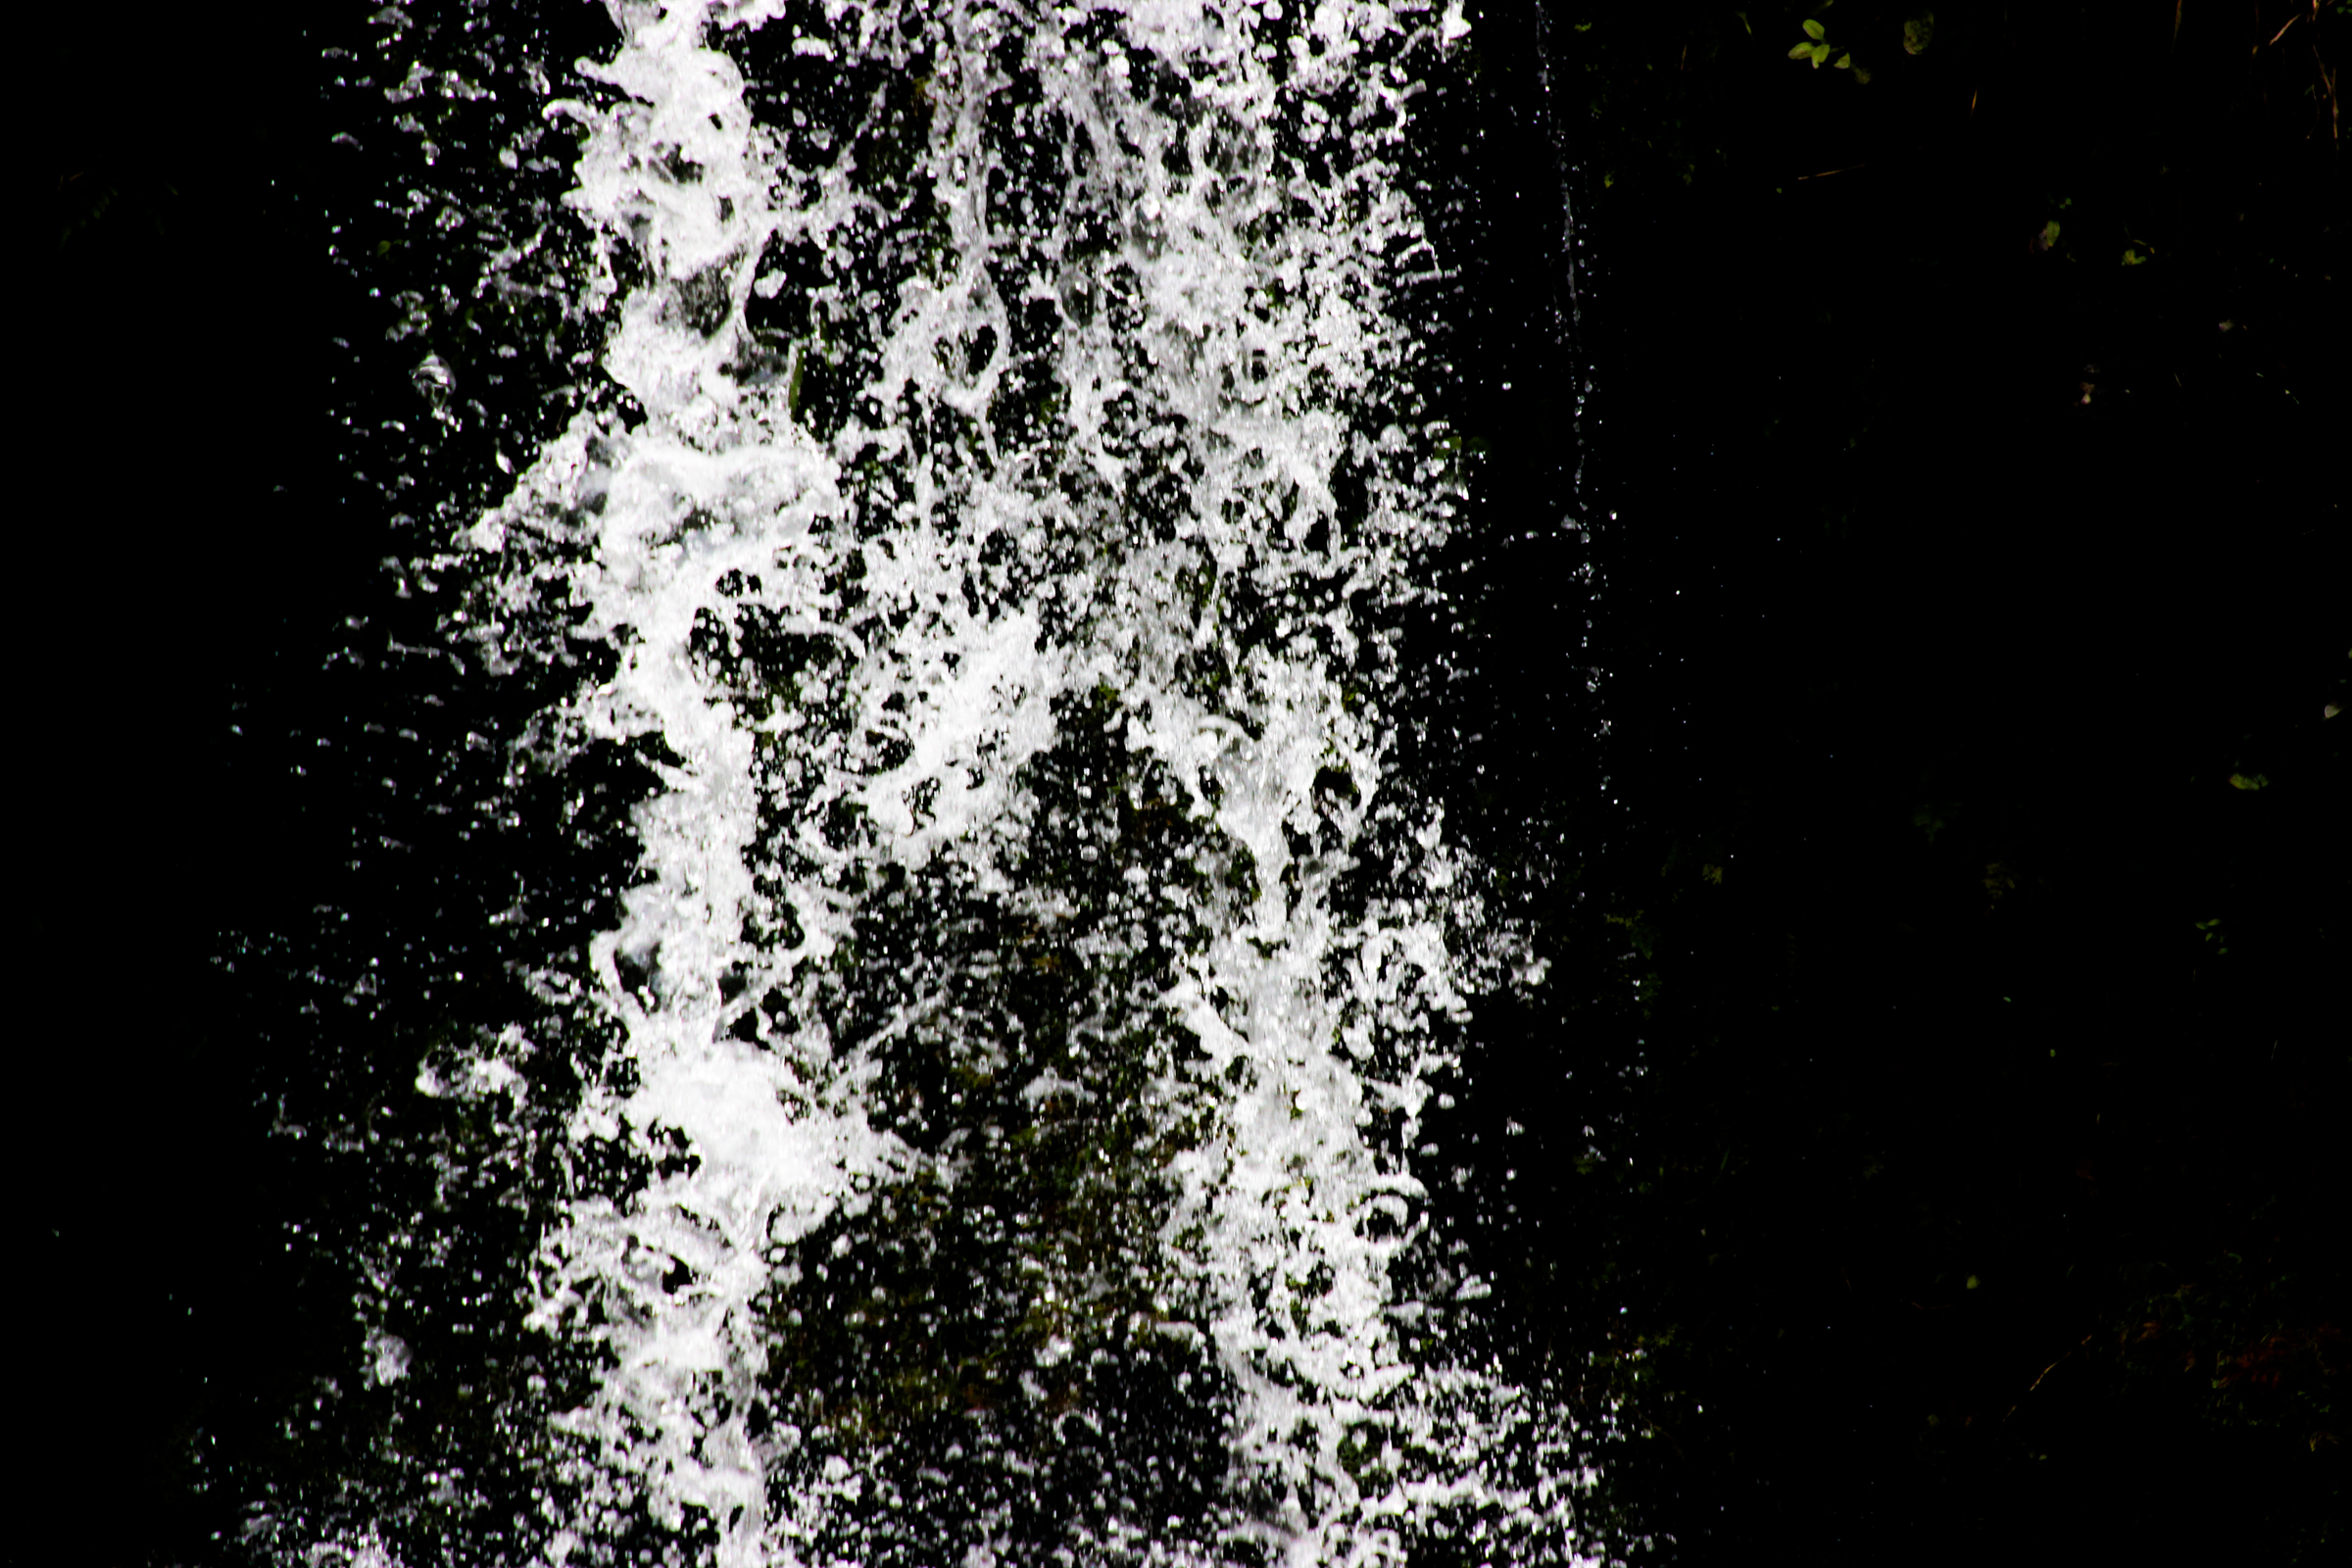 Free Stock Photo of Water Falling Against Black Background